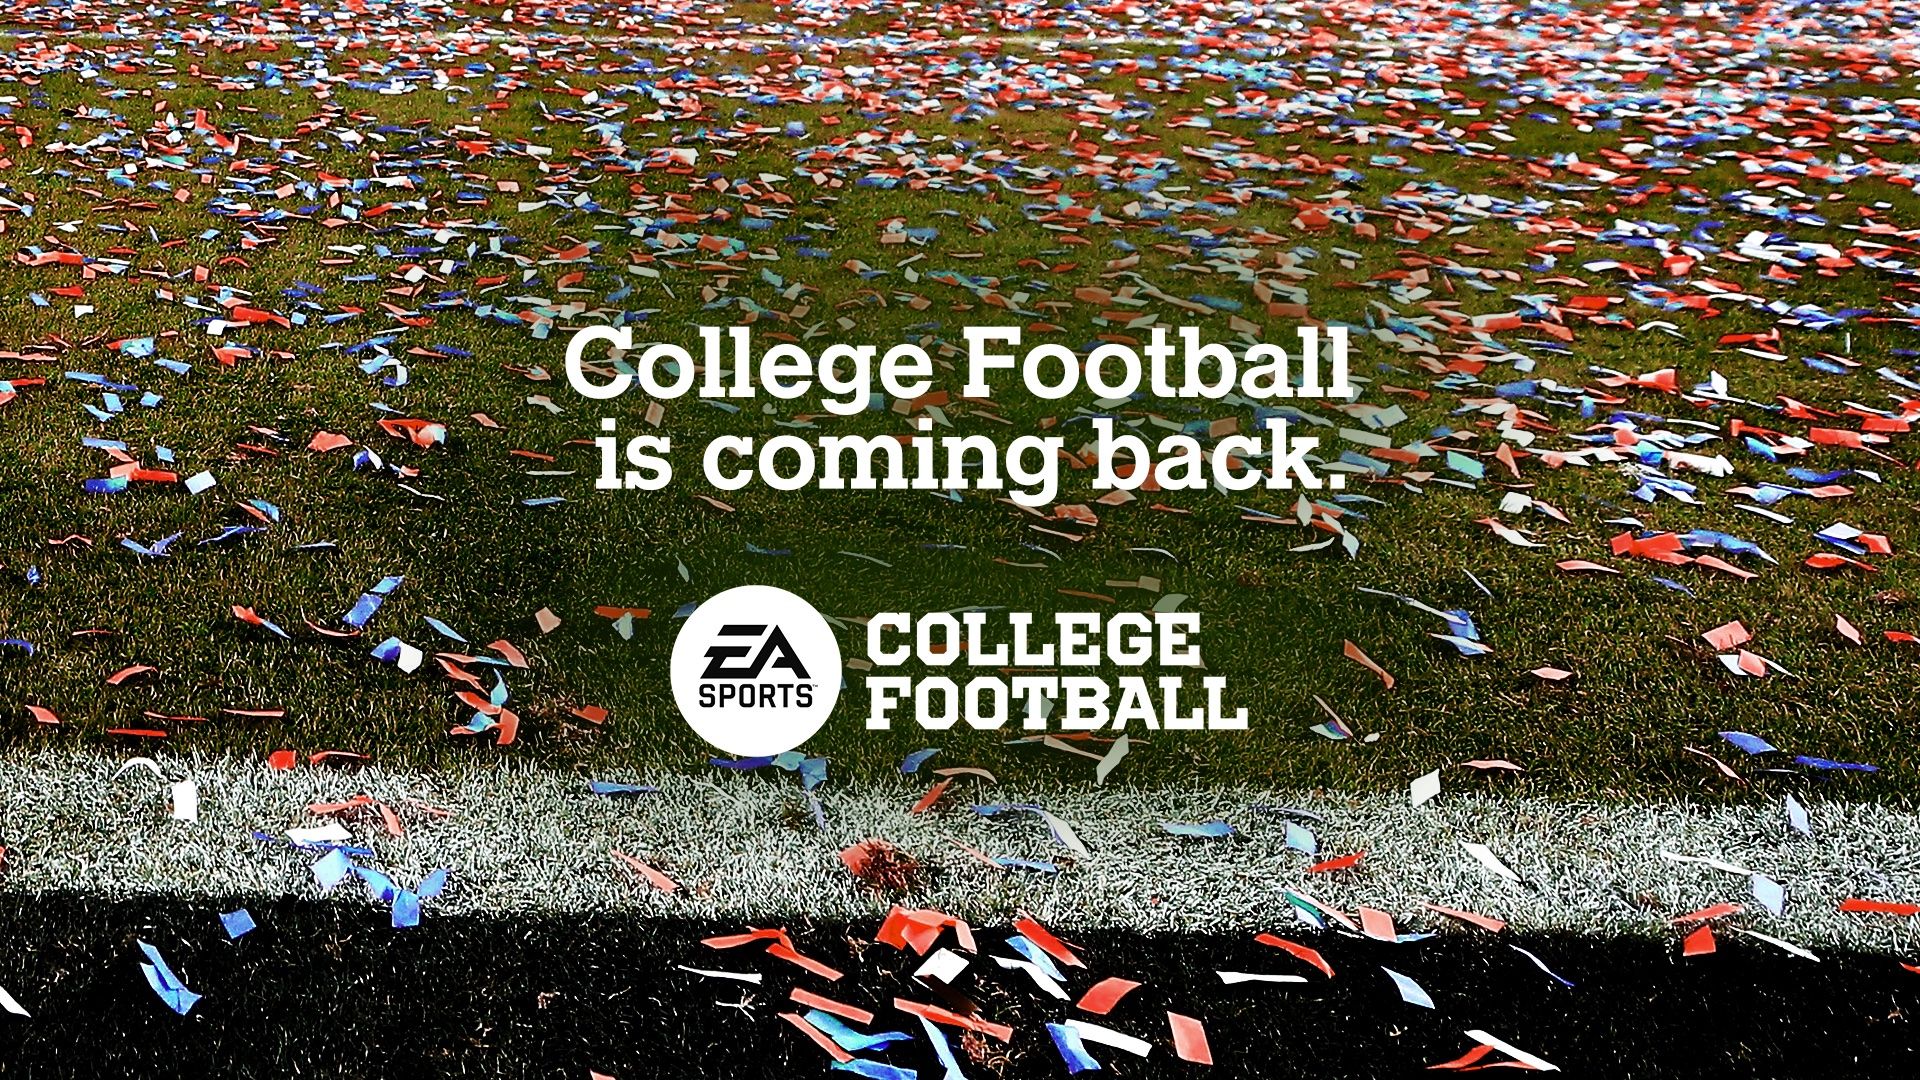 ea sports college football twitter image